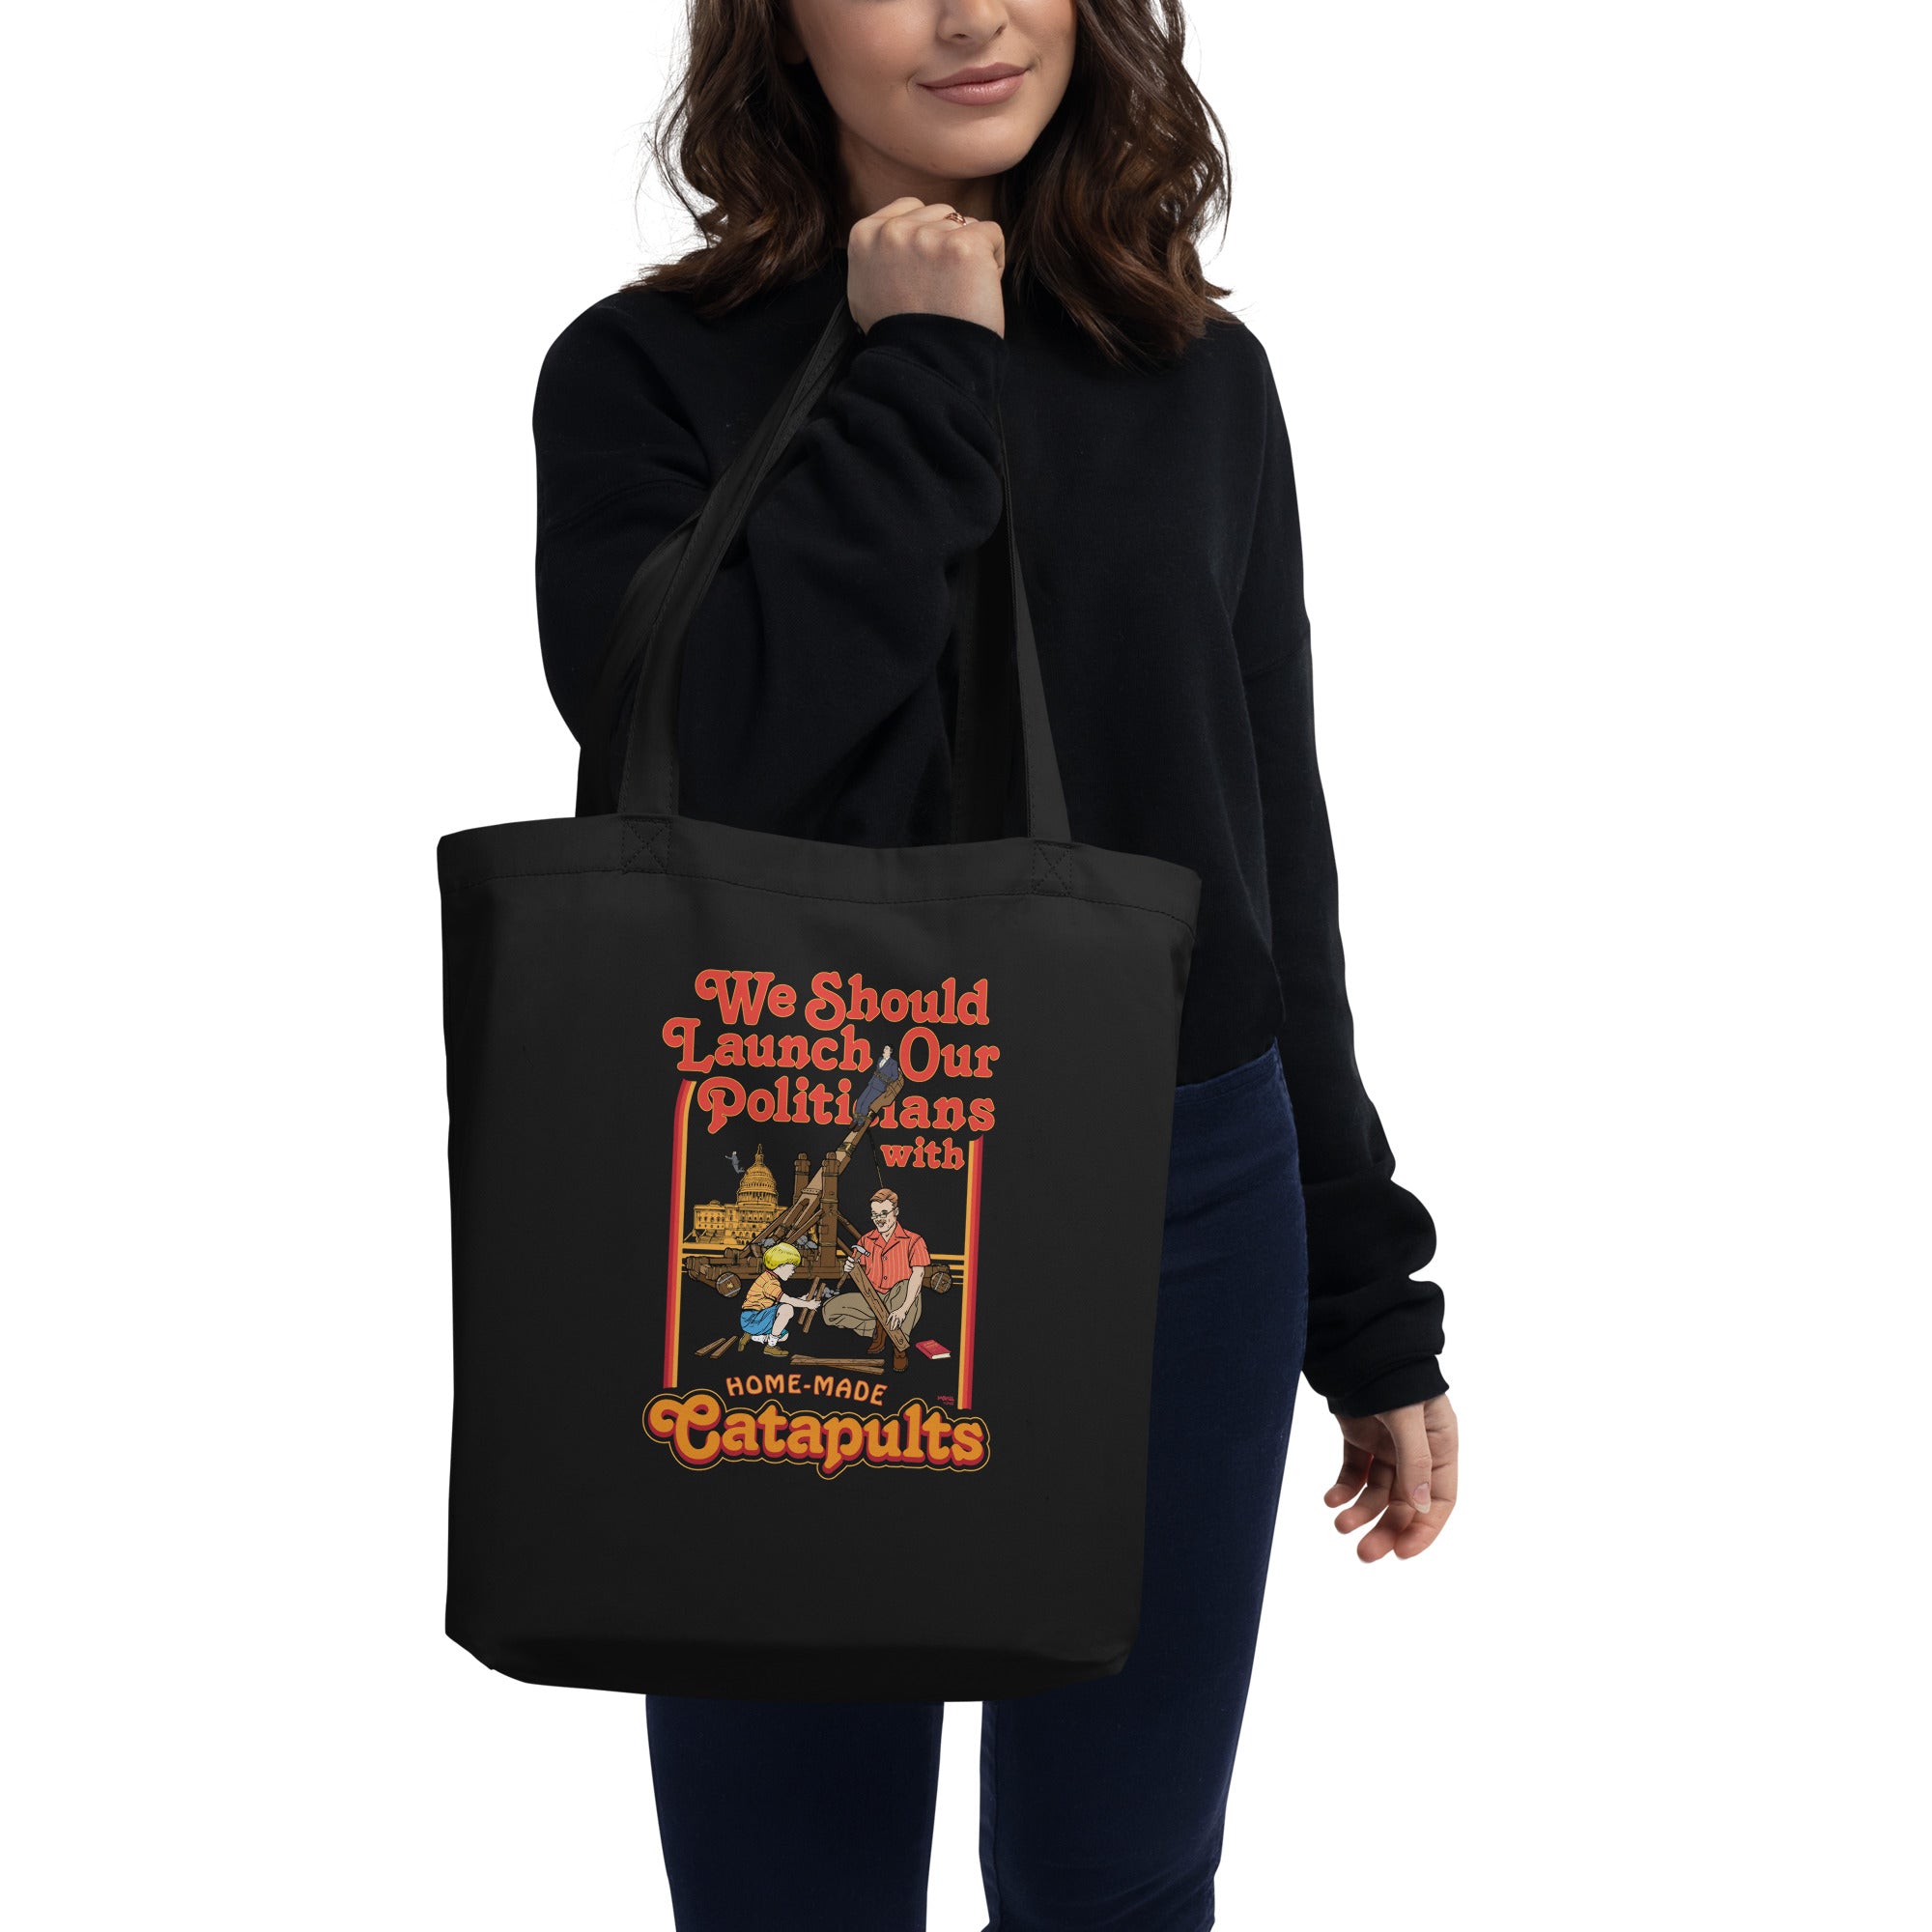 We Should Launch Our Politicians from Catapults Eco Tote Bag